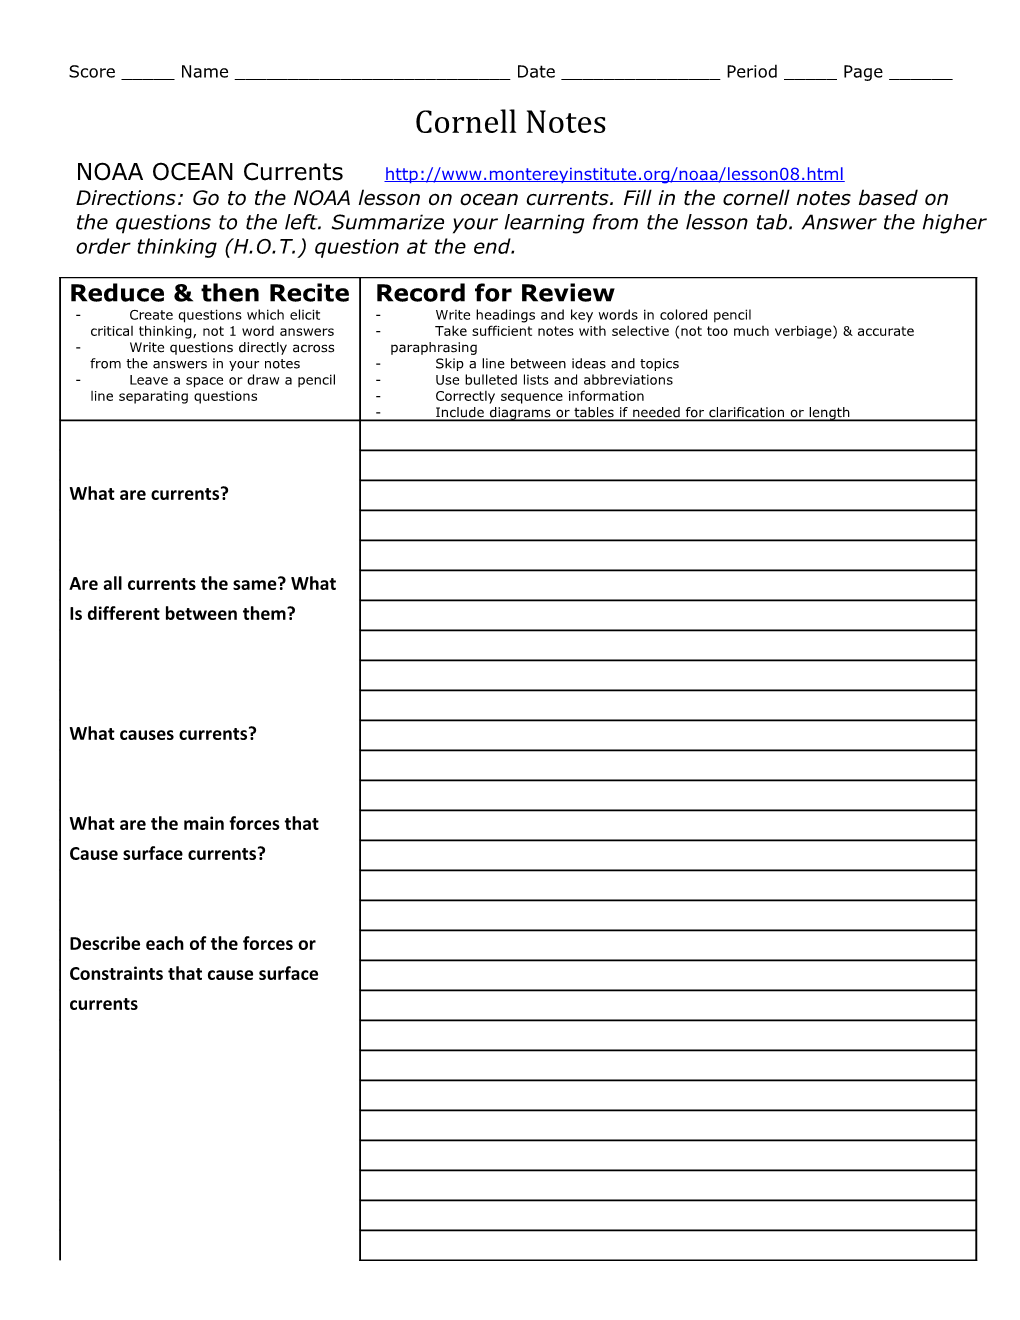 Cornell Notes Template s4